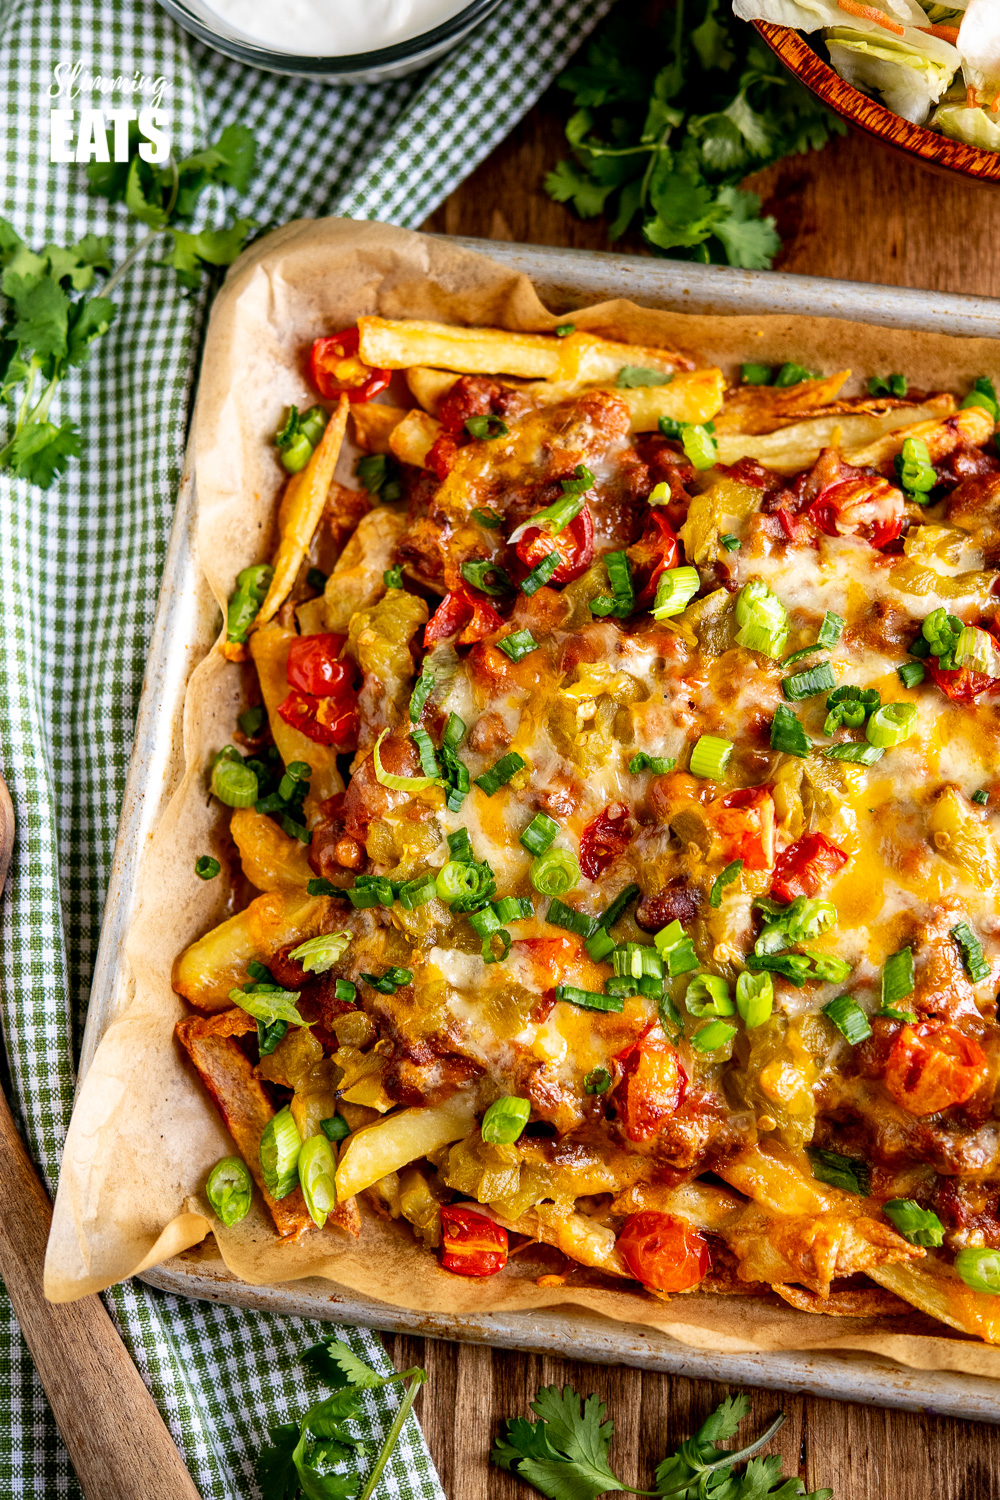 chilli cheese fries on a baking tray lined with parchment paper on wooden board with green checked fabric napkin